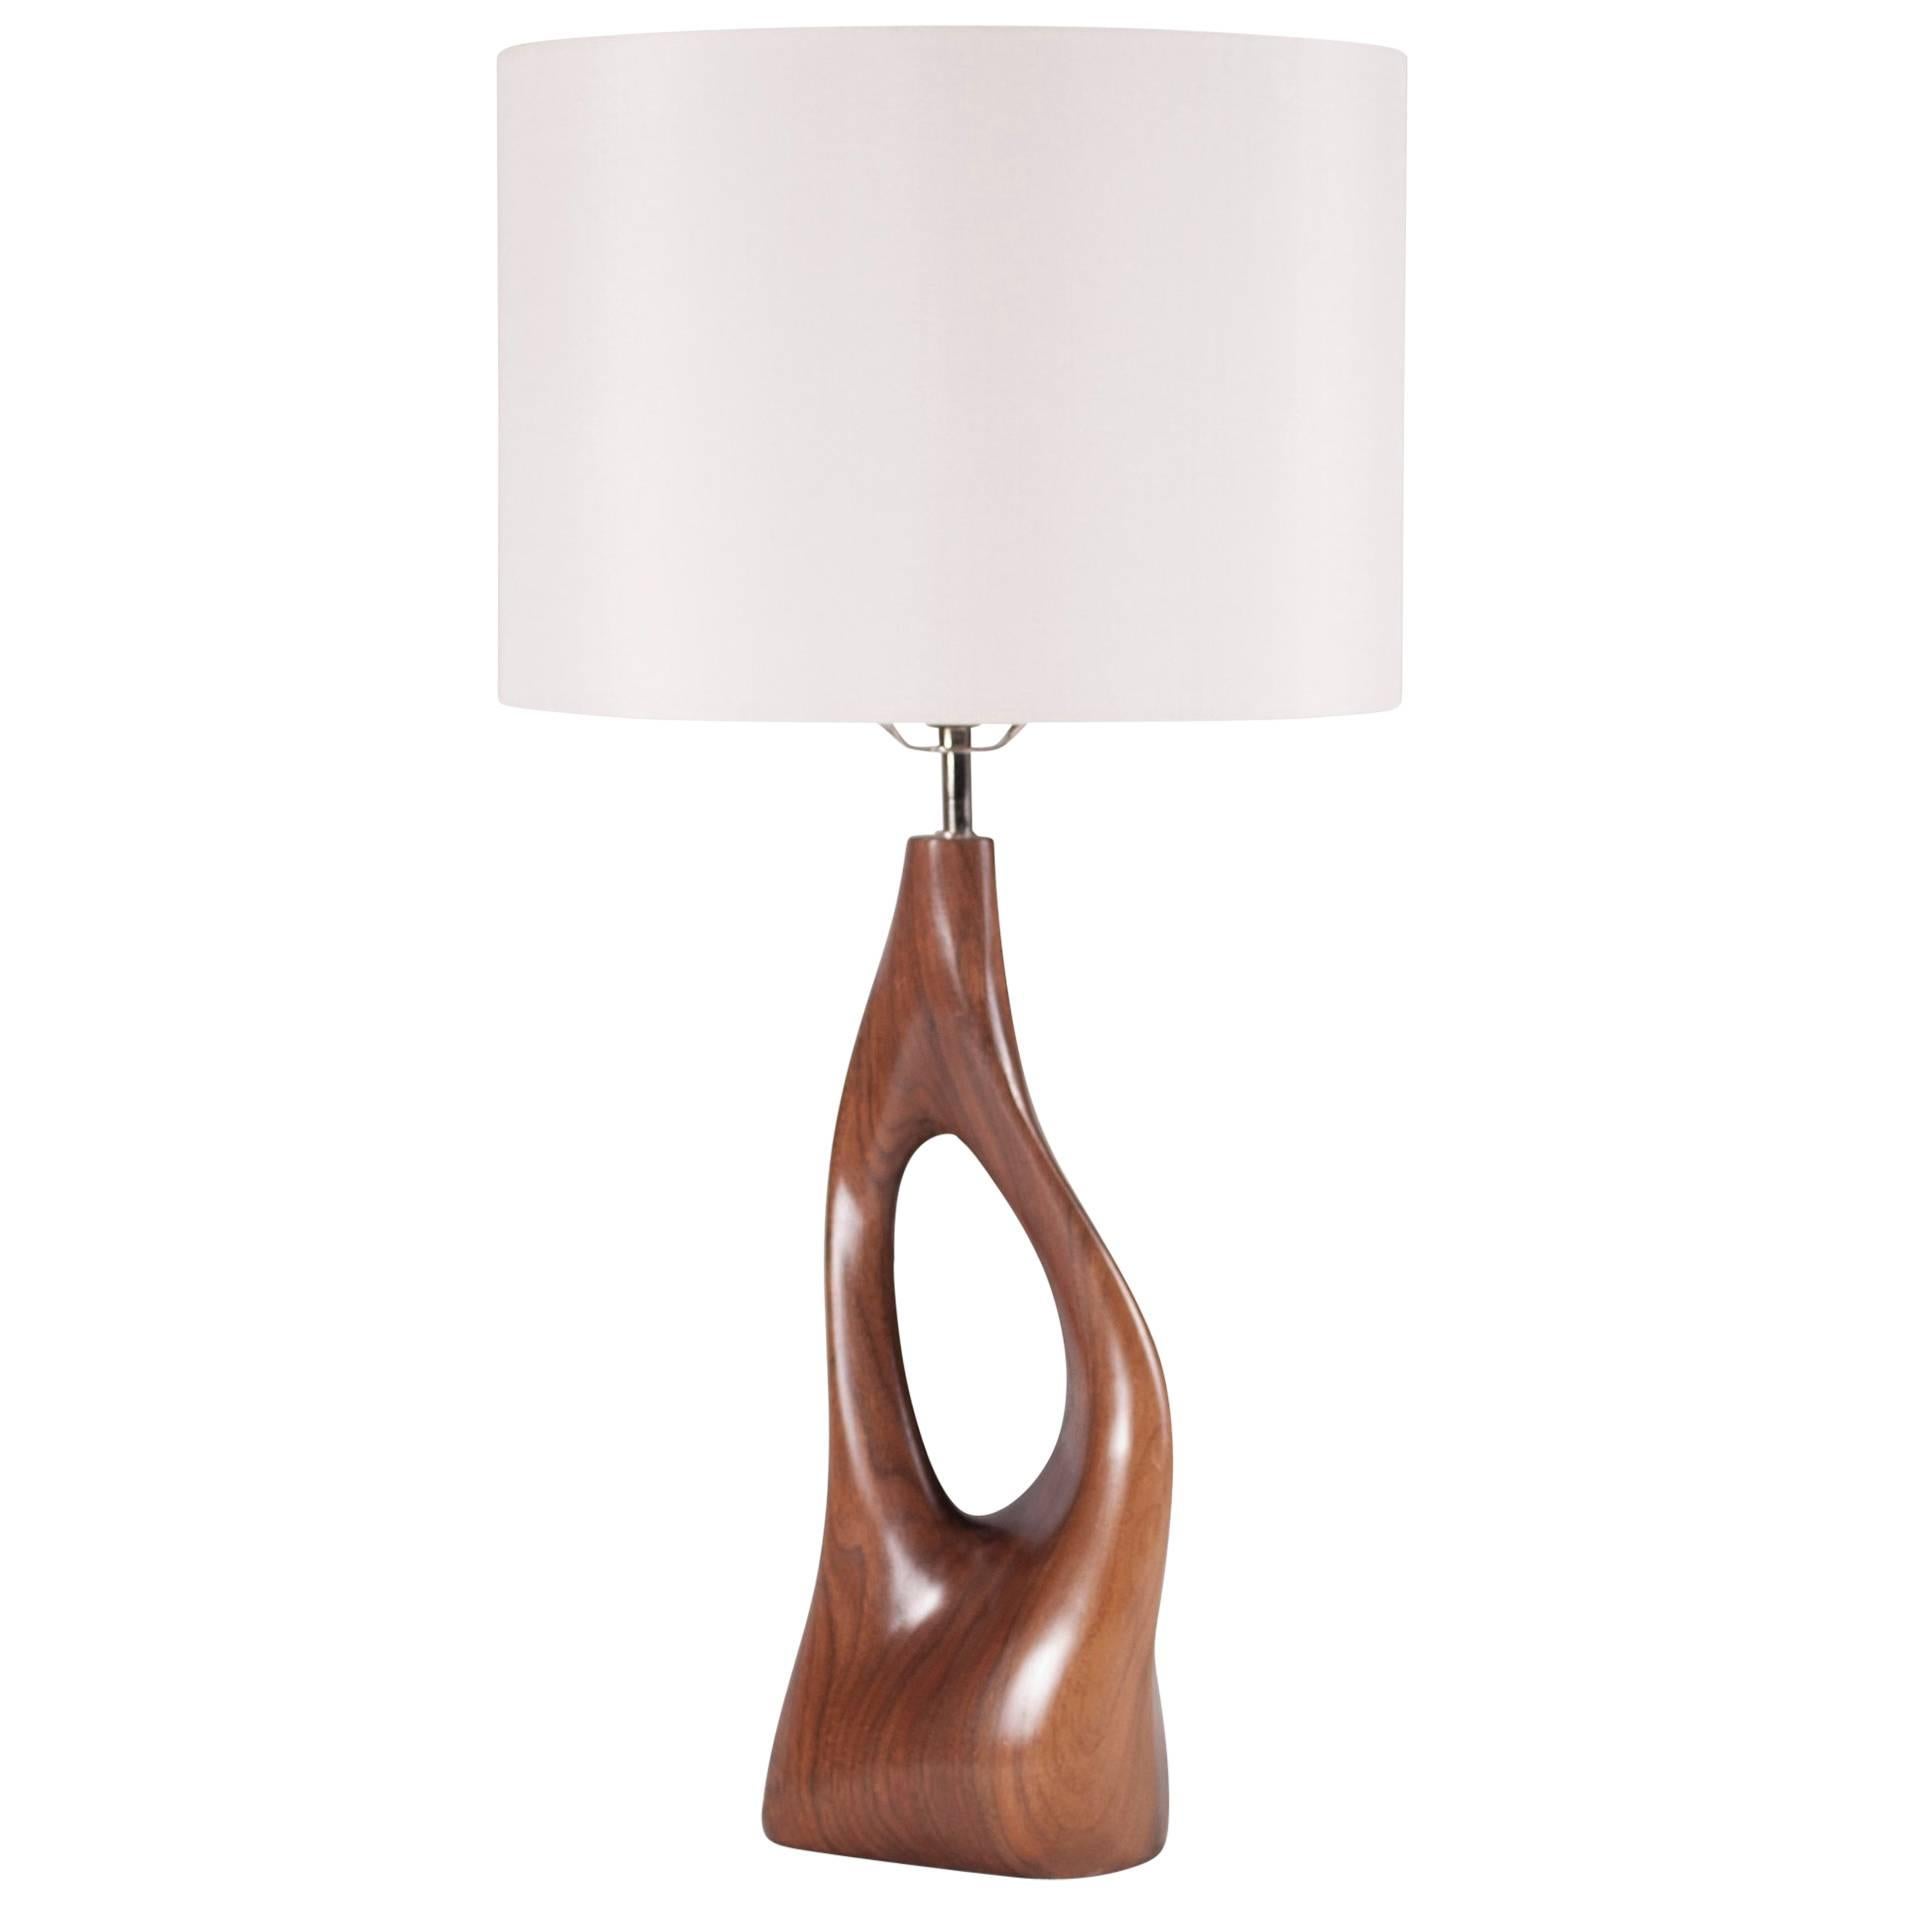 Amorph Helix Table Lamp Solid Walnut, White Shade For Sale